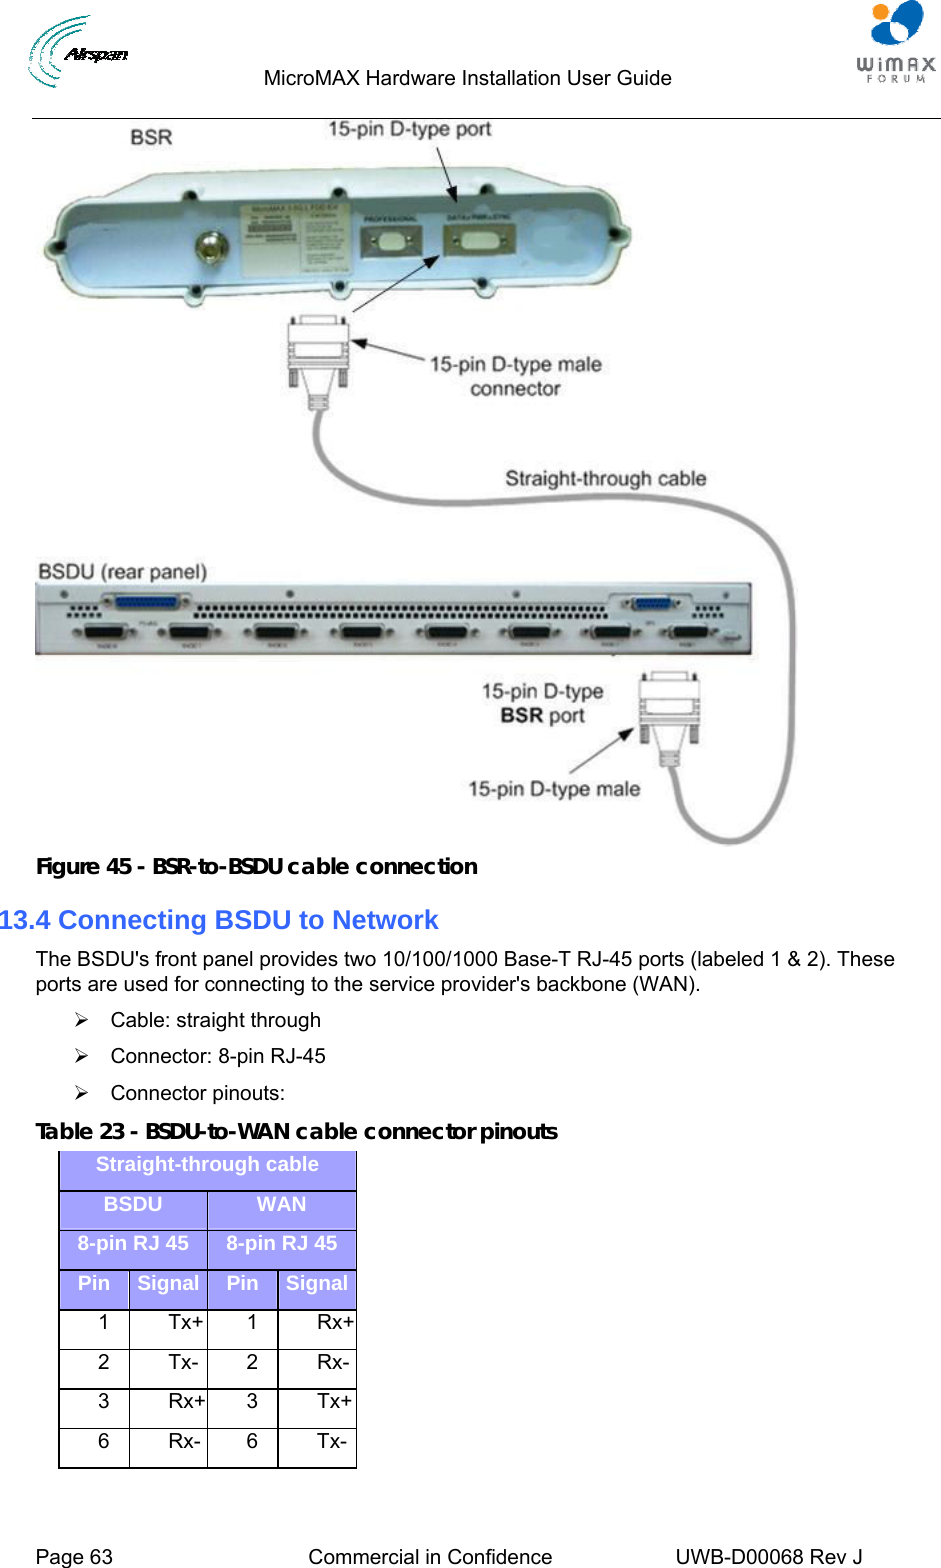                                  MicroMAX Hardware Installation User Guide     Page 63  Commercial in Confidence  UWB-D00068 Rev J    Figure 45 - BSR-to-BSDU cable connection 13.4 Connecting BSDU to Network The BSDU&apos;s front panel provides two 10/100/1000 Base-T RJ-45 ports (labeled 1 &amp; 2). These ports are used for connecting to the service provider&apos;s backbone (WAN). ¾  Cable: straight through ¾  Connector: 8-pin RJ-45 ¾ Connector pinouts: Table 23 - BSDU-to-WAN cable connector pinouts Straight-through cable BSDU  WAN 8-pin RJ 45  8-pin RJ 45 Pin  Signal  Pin  Signal 1 Tx+ 1 Rx+ 2 Tx- 2 Rx- 3 Rx+ 3 Tx+ 6 Rx- 6 Tx-  